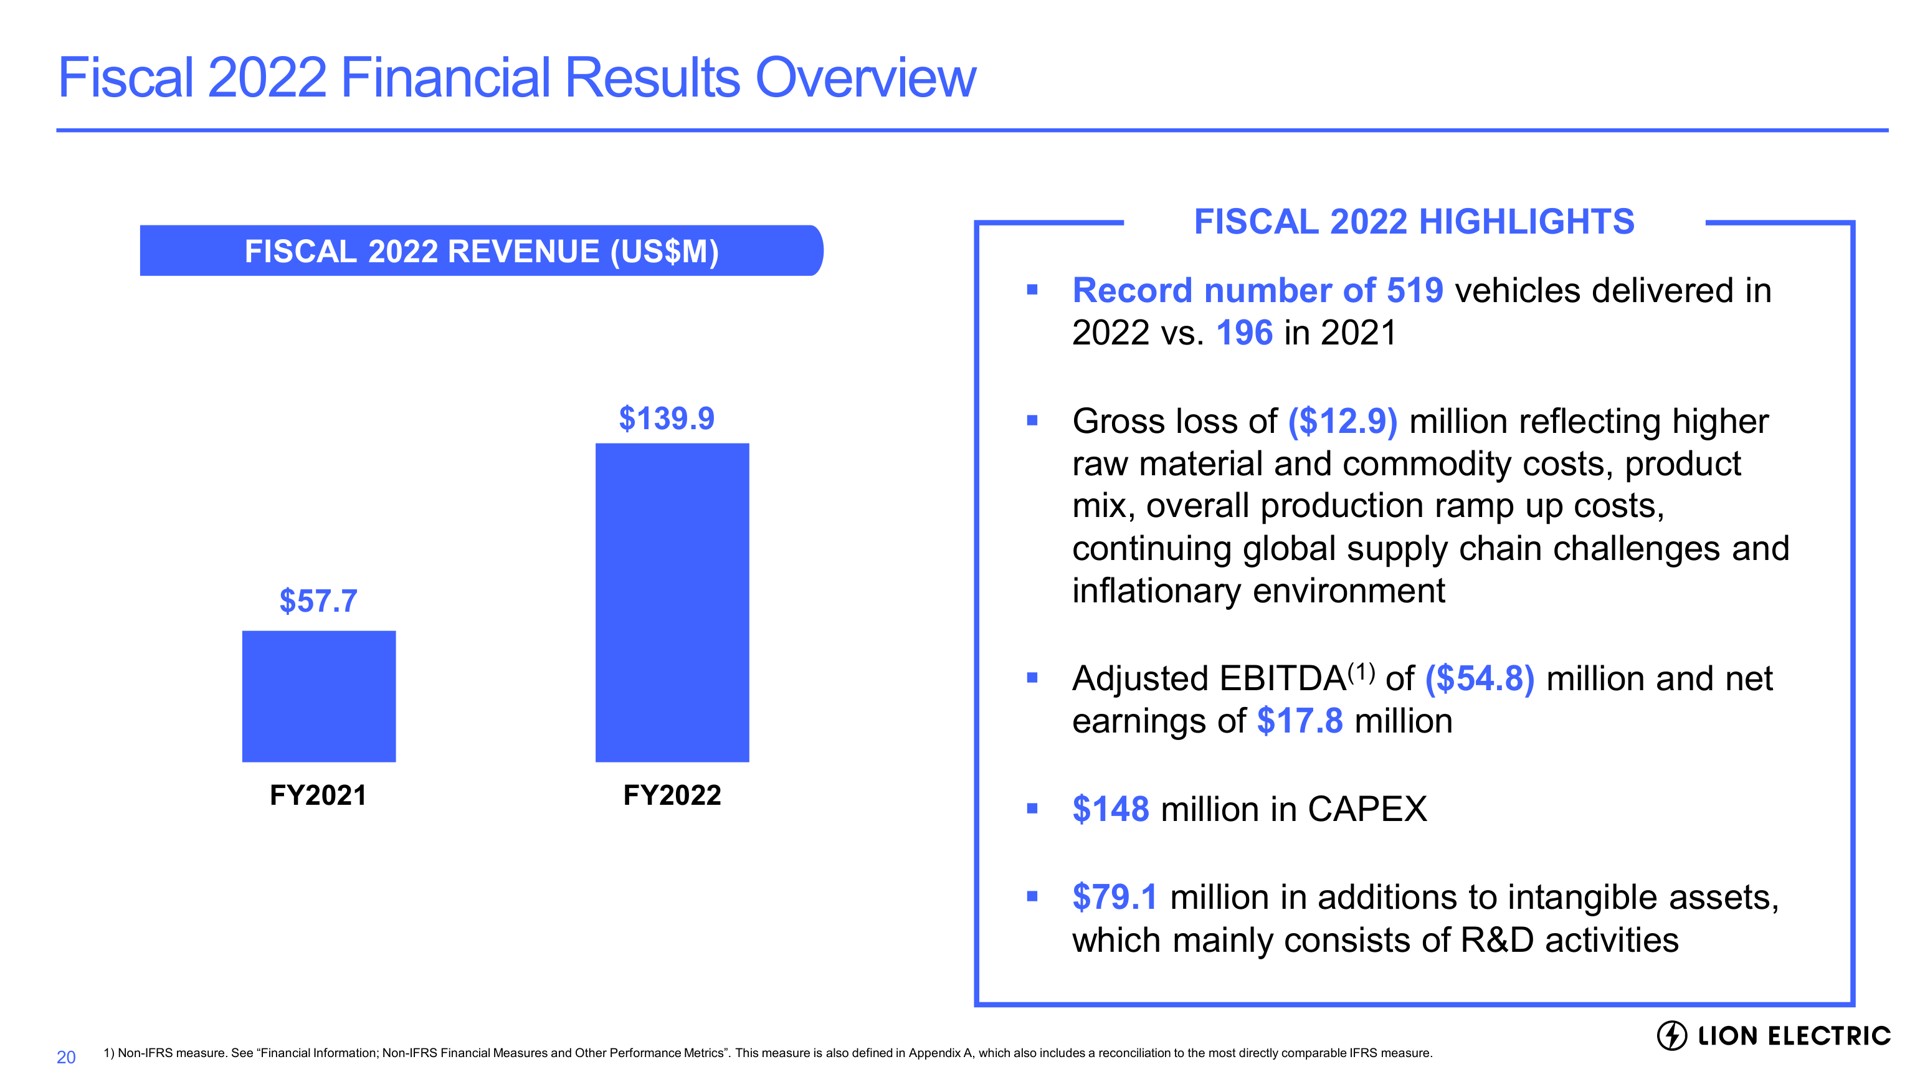 fiscal financial results overview fiscal revenue us fiscal highlights record number of vehicles delivered in in gross loss of million reflecting higher raw material and commodity costs product mix overall production ramp up costs continuing global supply chain challenges and inflationary environment adjusted of million and net earnings of million million in million in additions to intangible assets which mainly consists of activities | Lion Electric